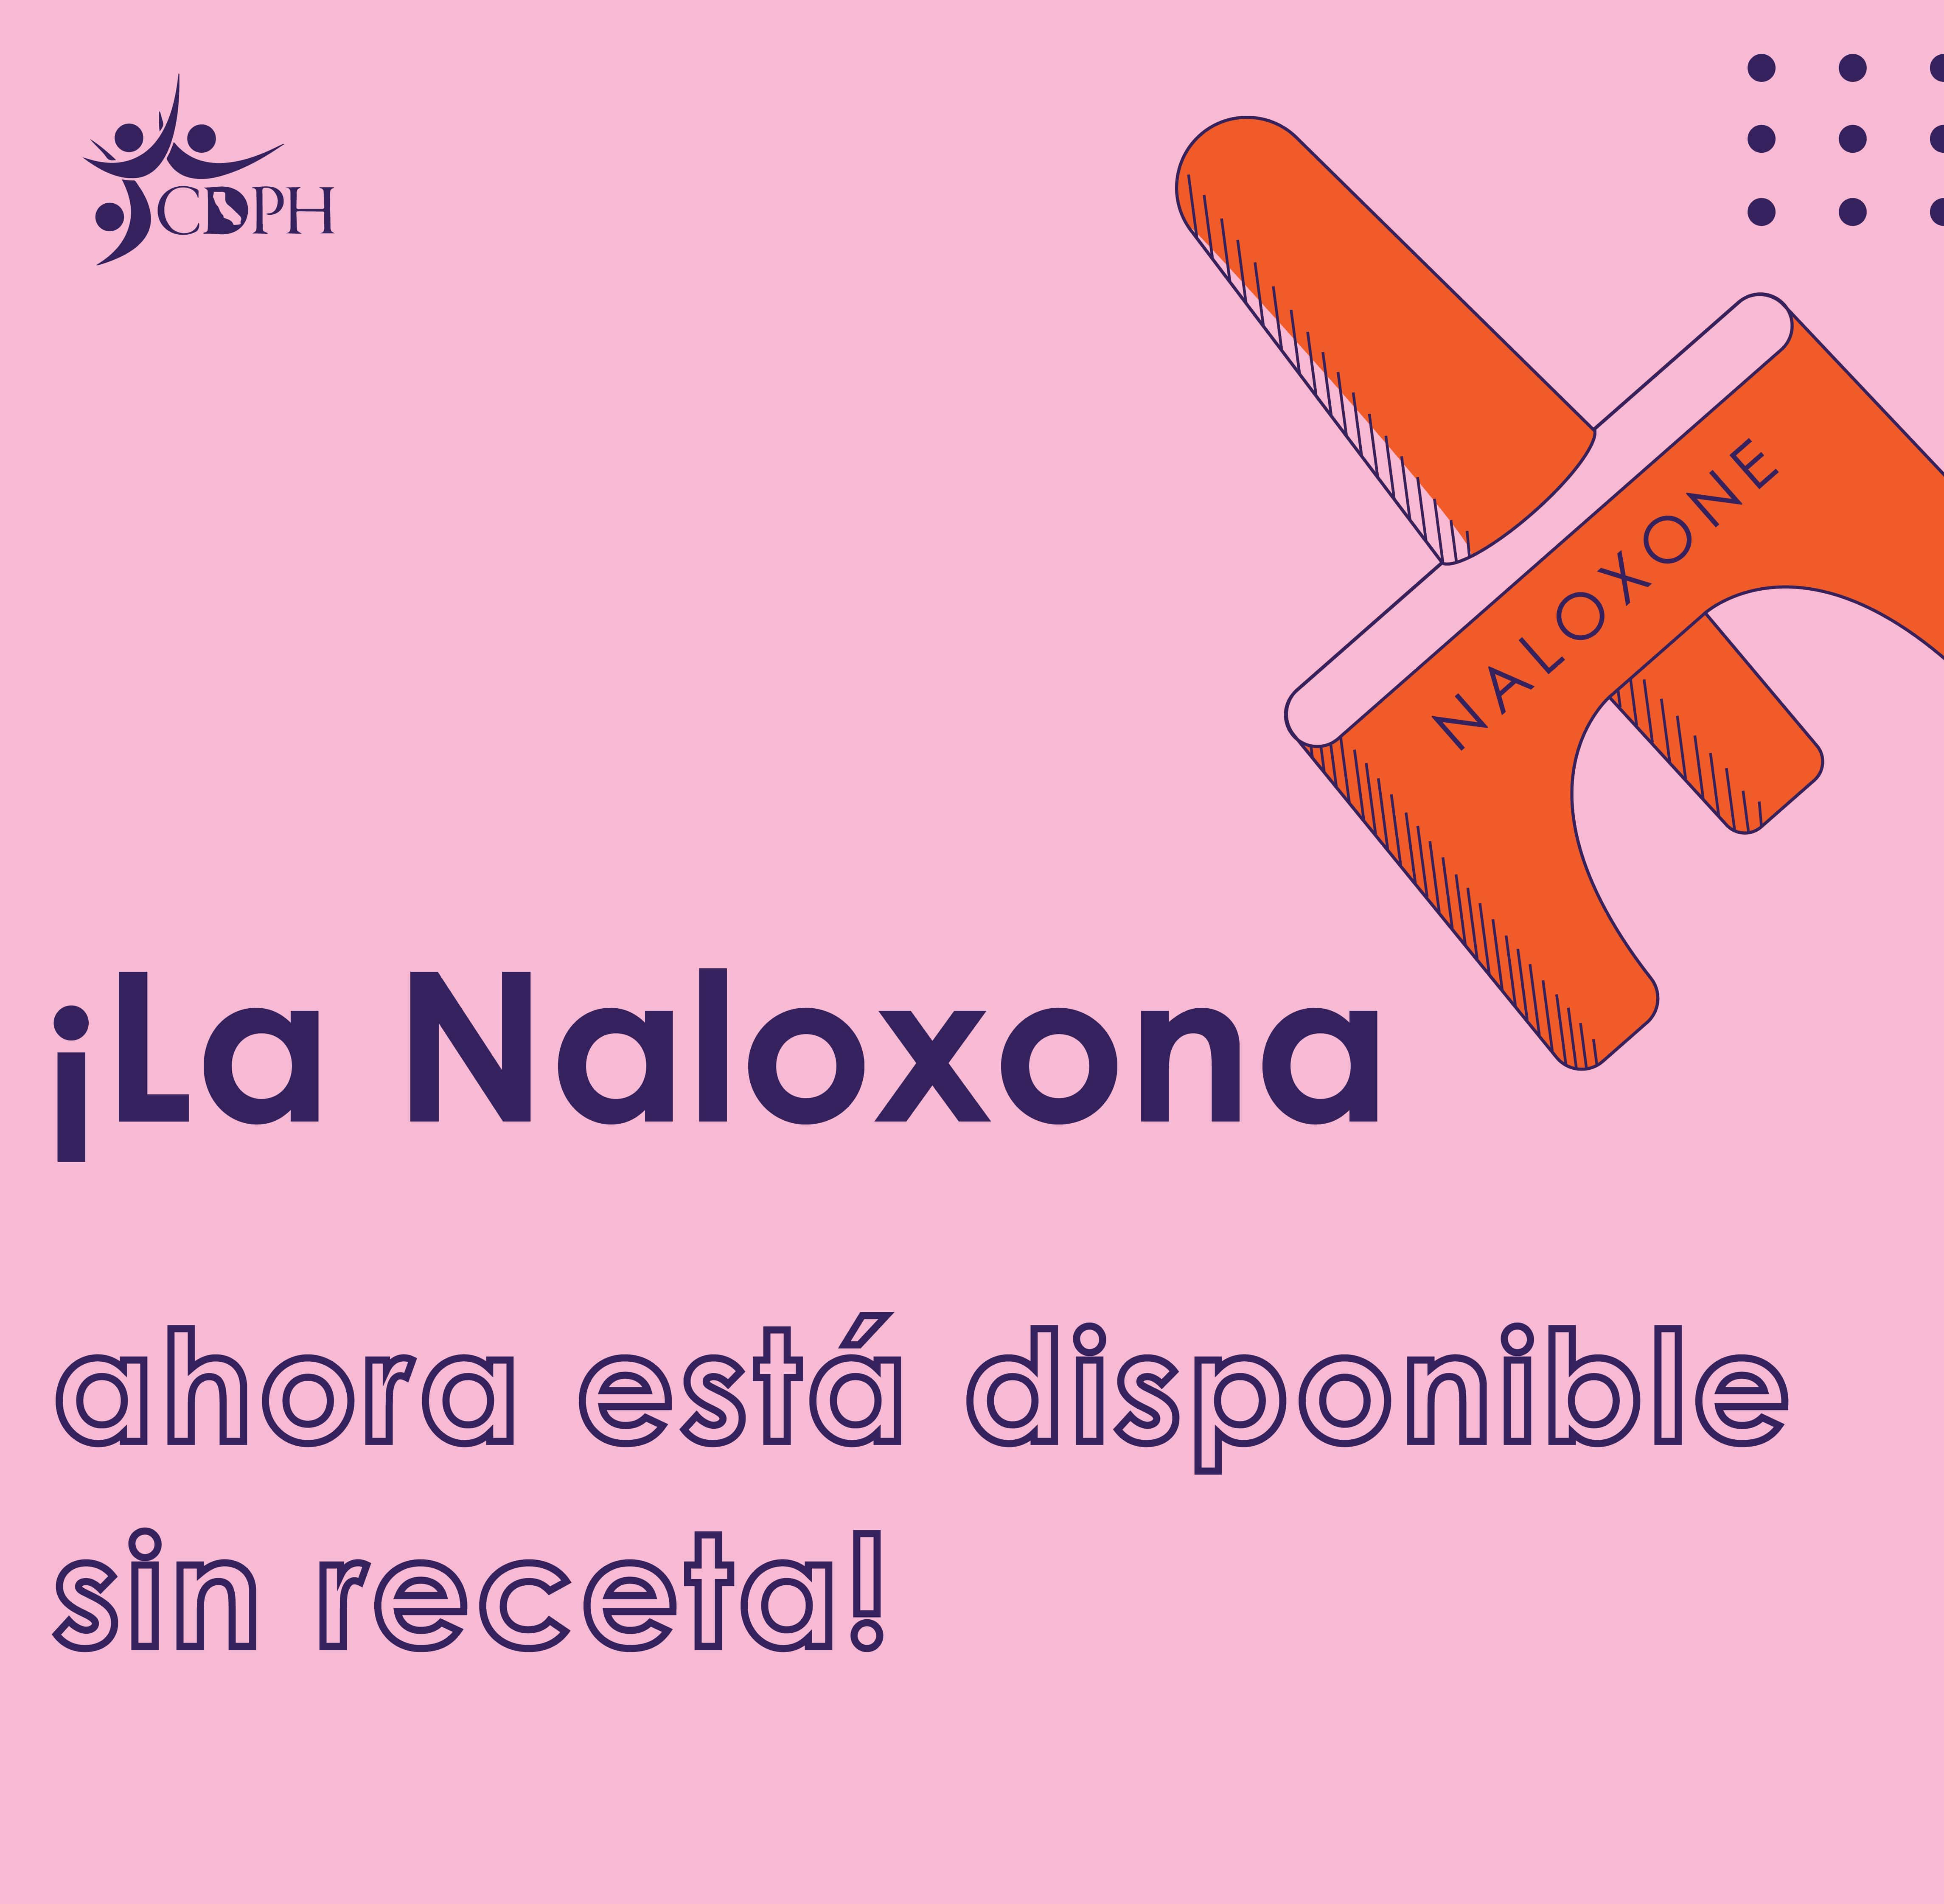 Naloxone is now available over the counter